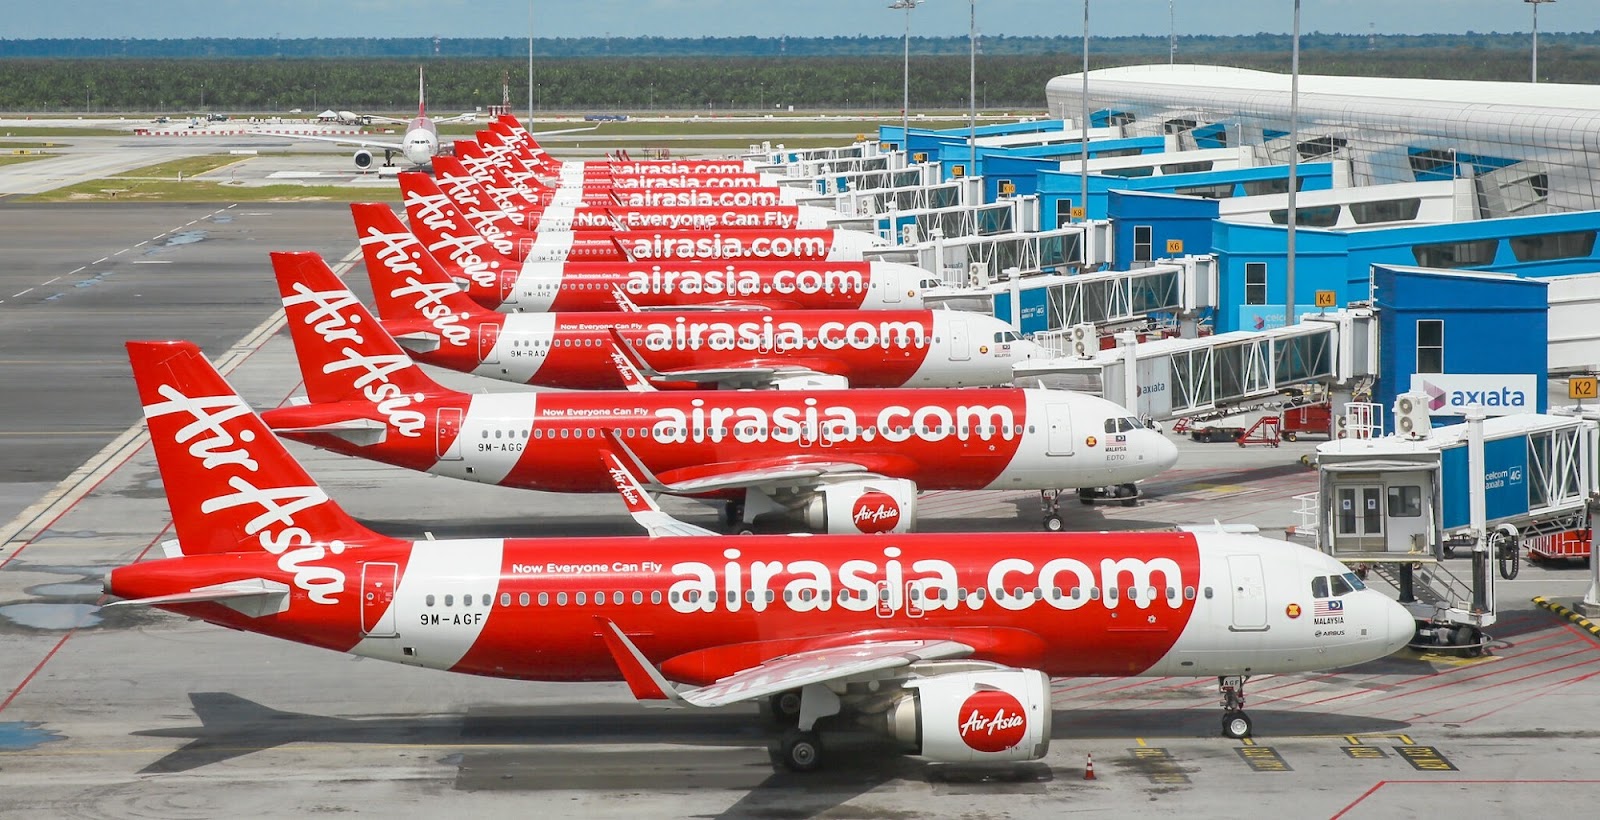 AirAsia received the World’s Leading Low-Cost Airline for 11th consecutive year and the World’s Leading Low-Cost Airline Cabin Crew for 7th straight year